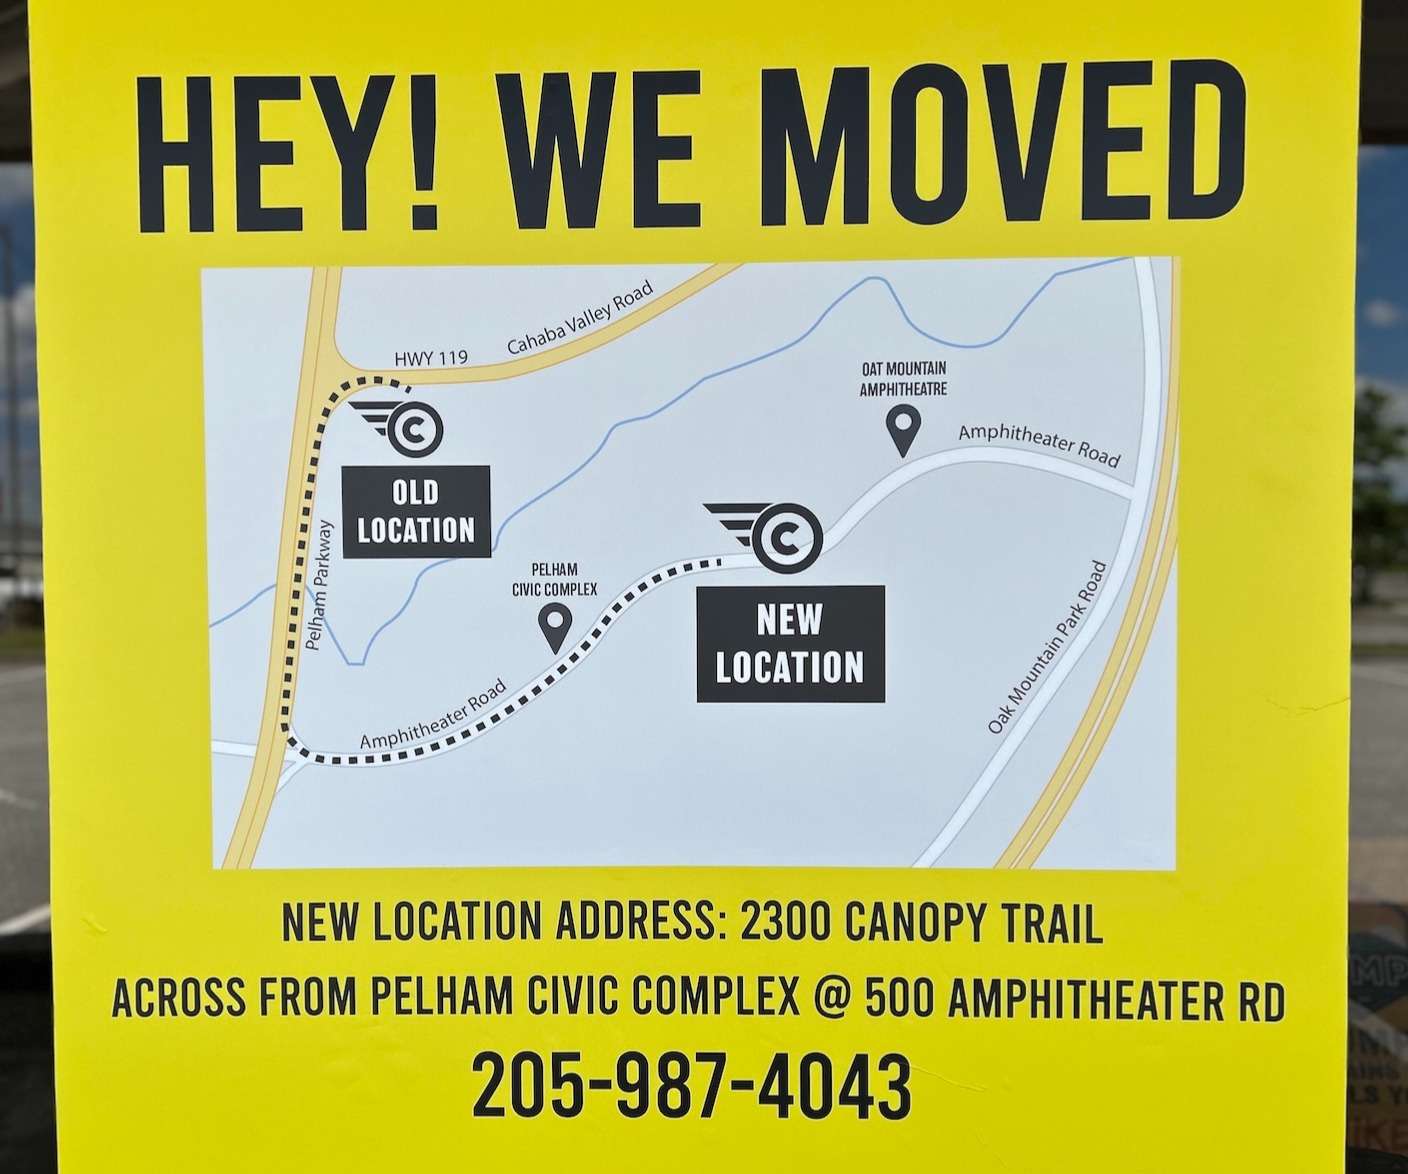 hey we moved. map to new location